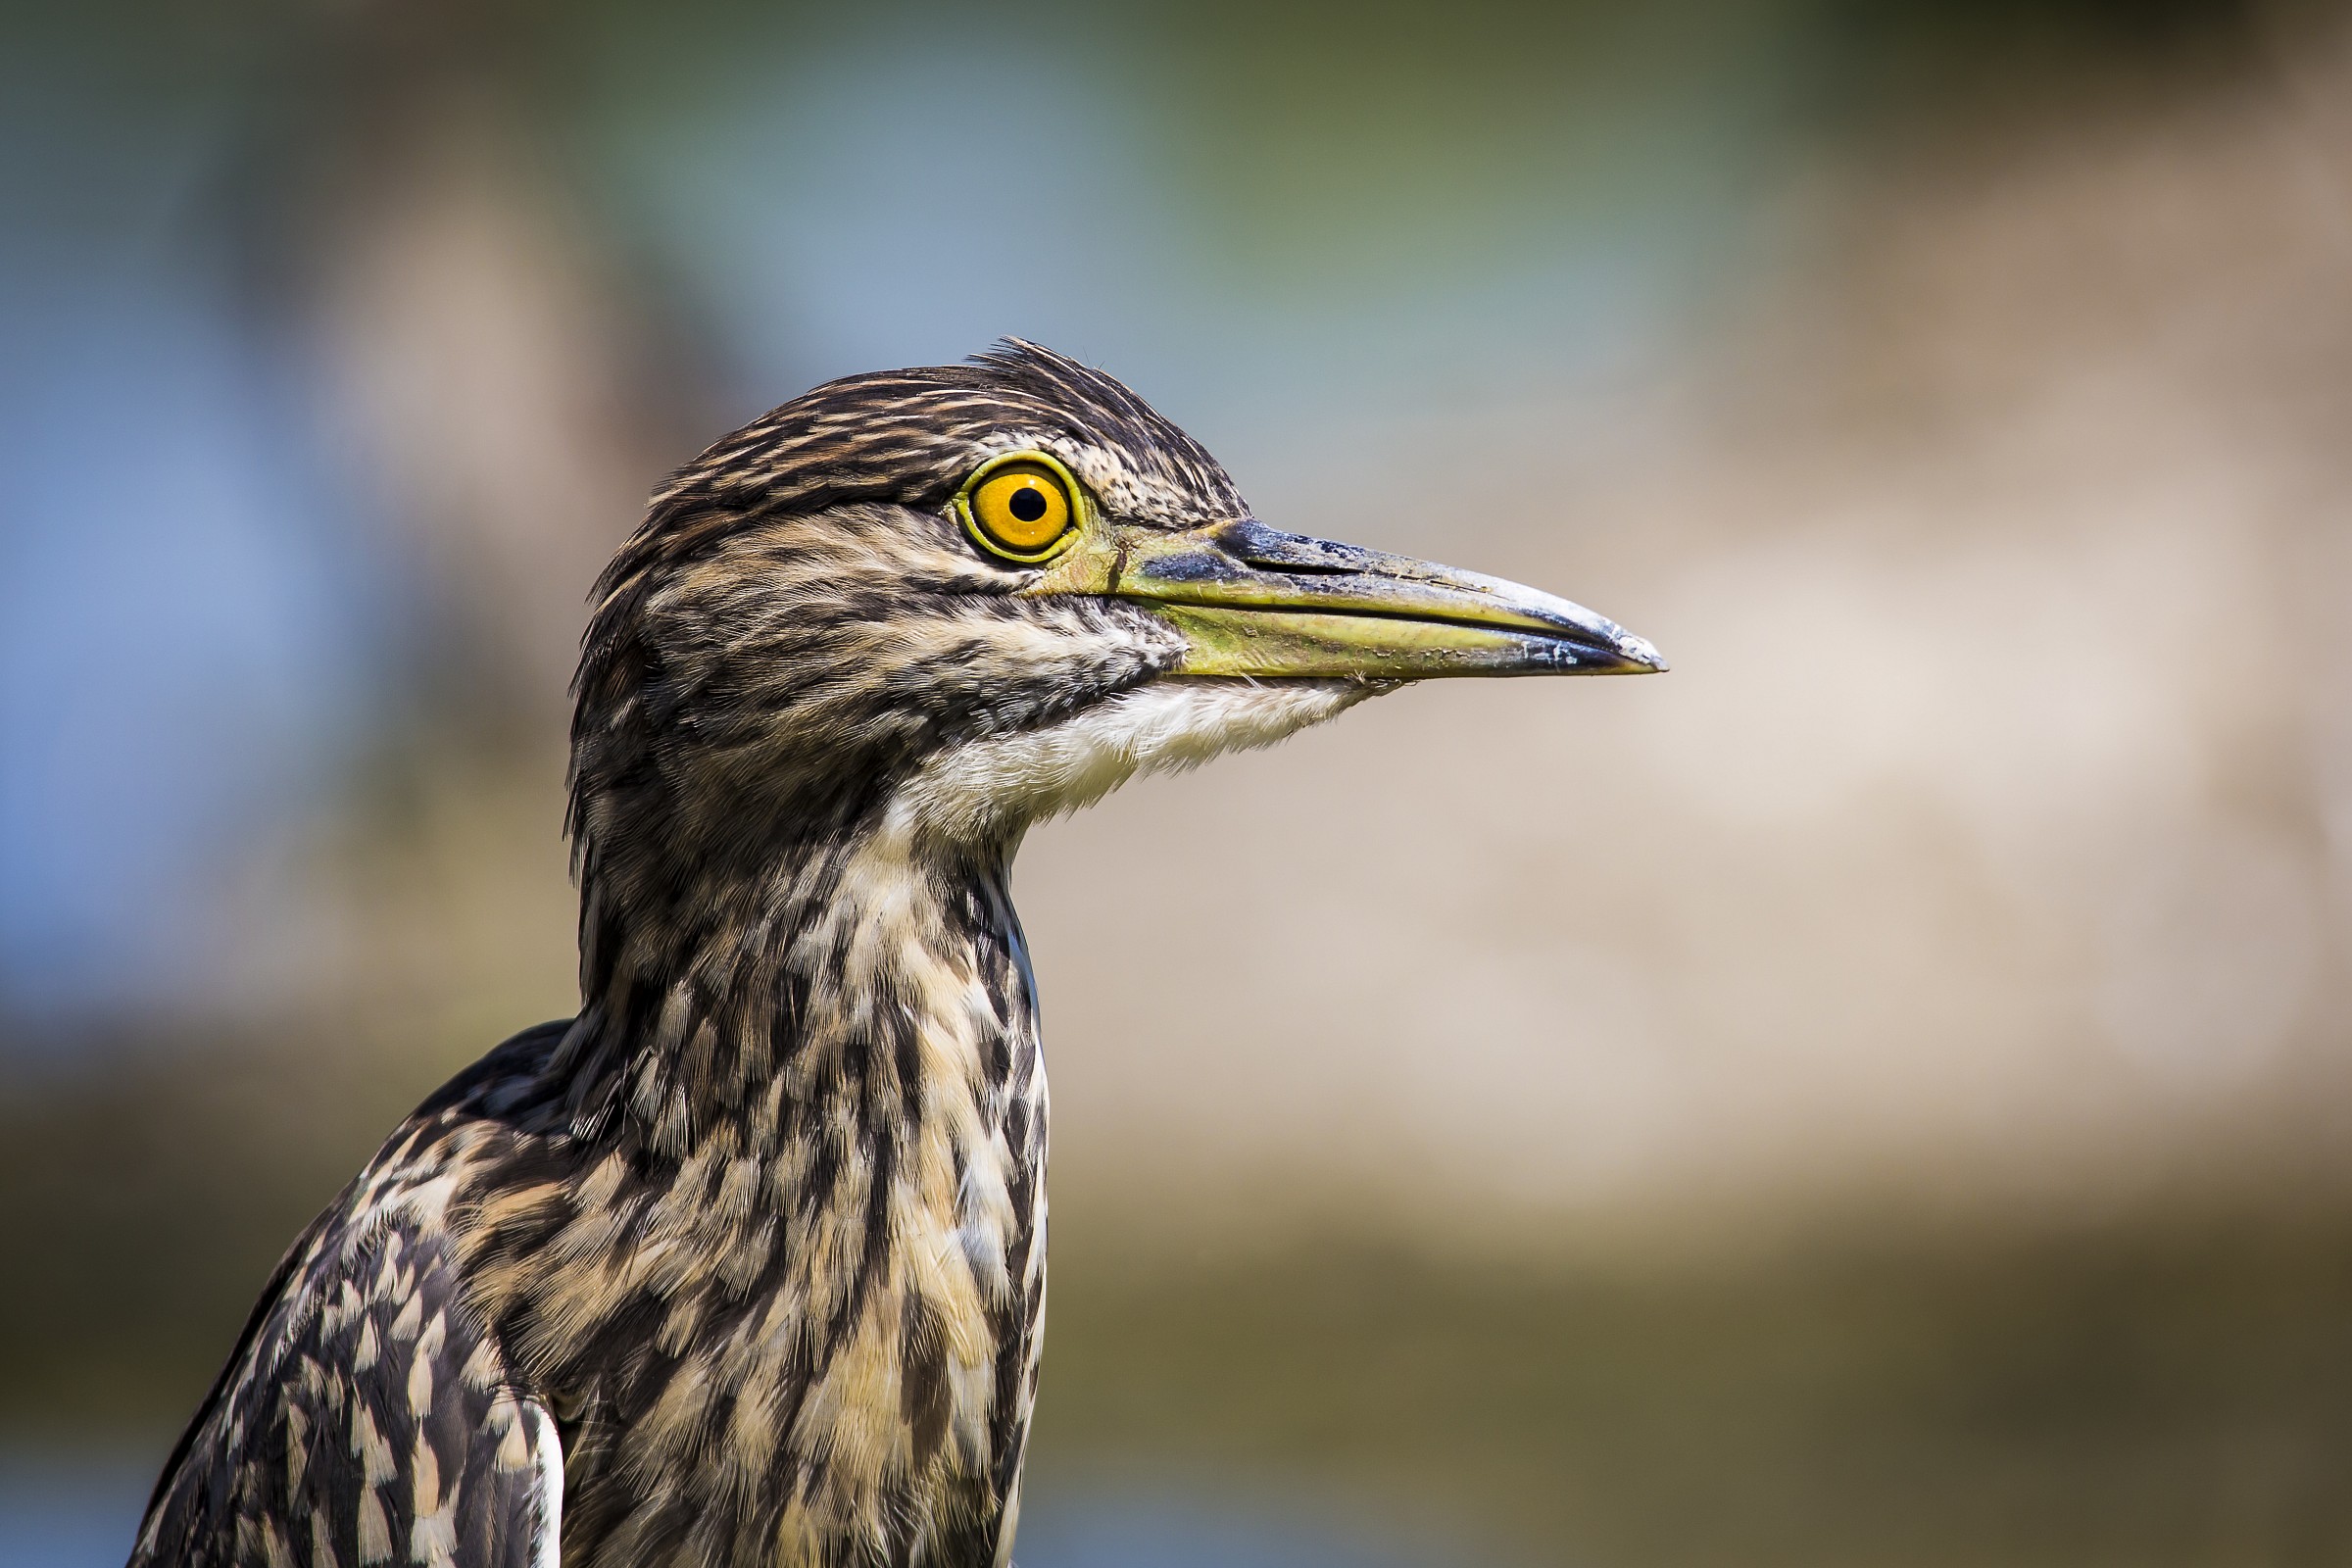 mosquito on young night heron...